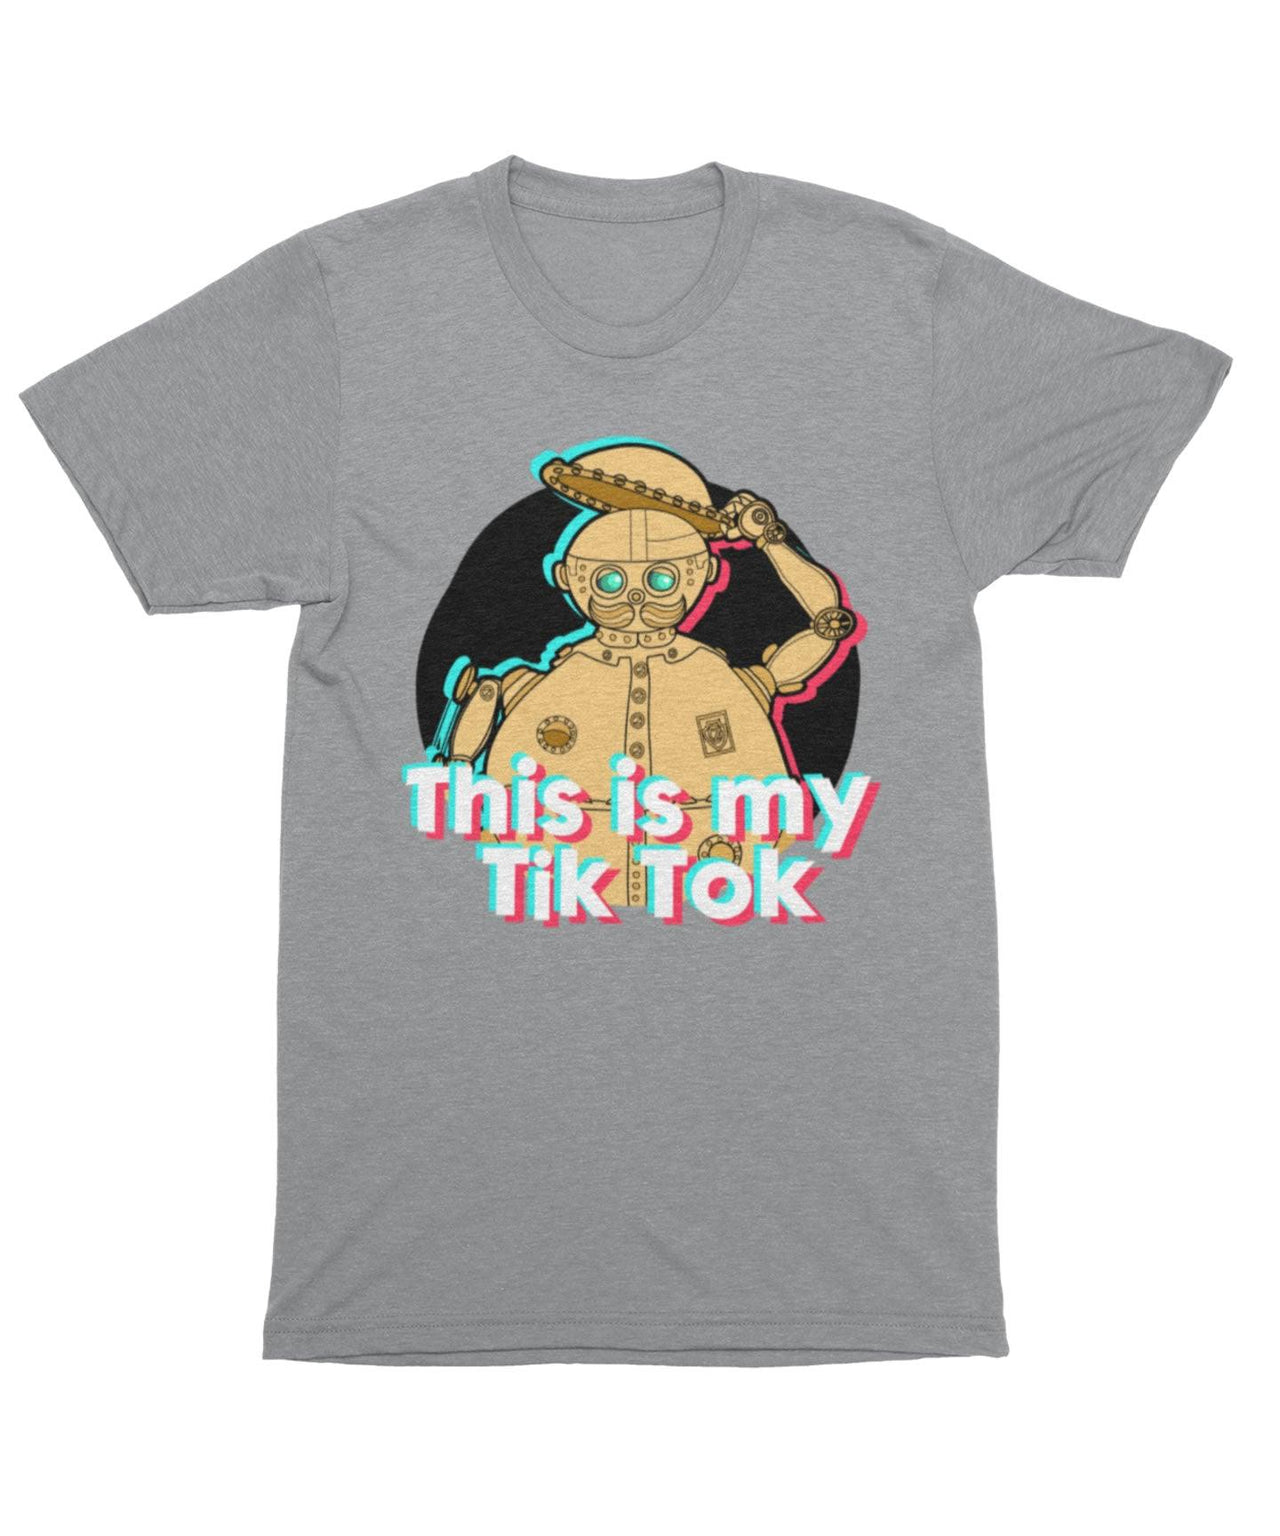 Top Notchy This Is My Tik Tok Men's/Unisex T-Shirt For Men 8Ball